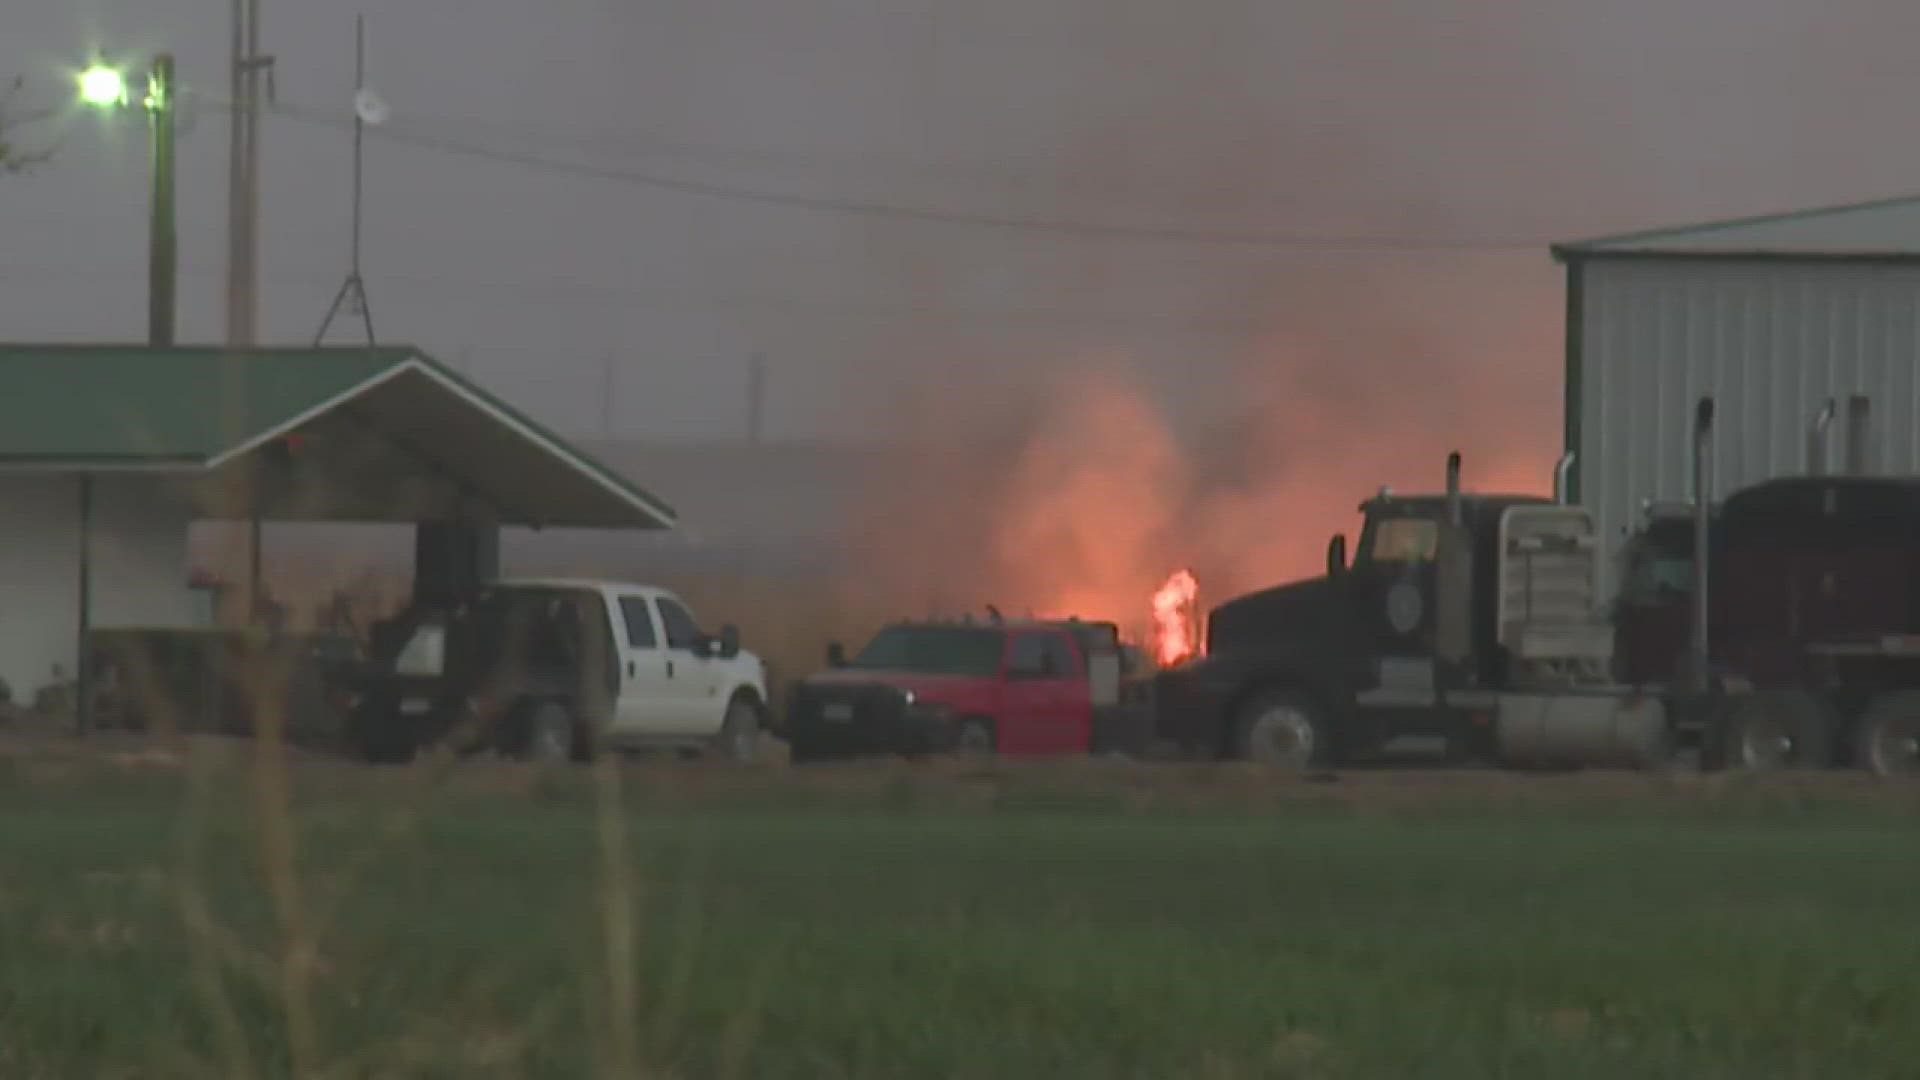 Neighbors – ranchers and farmers – banded together in southeastern Colorado, using tractors to create fire lines to try and contain the flames.